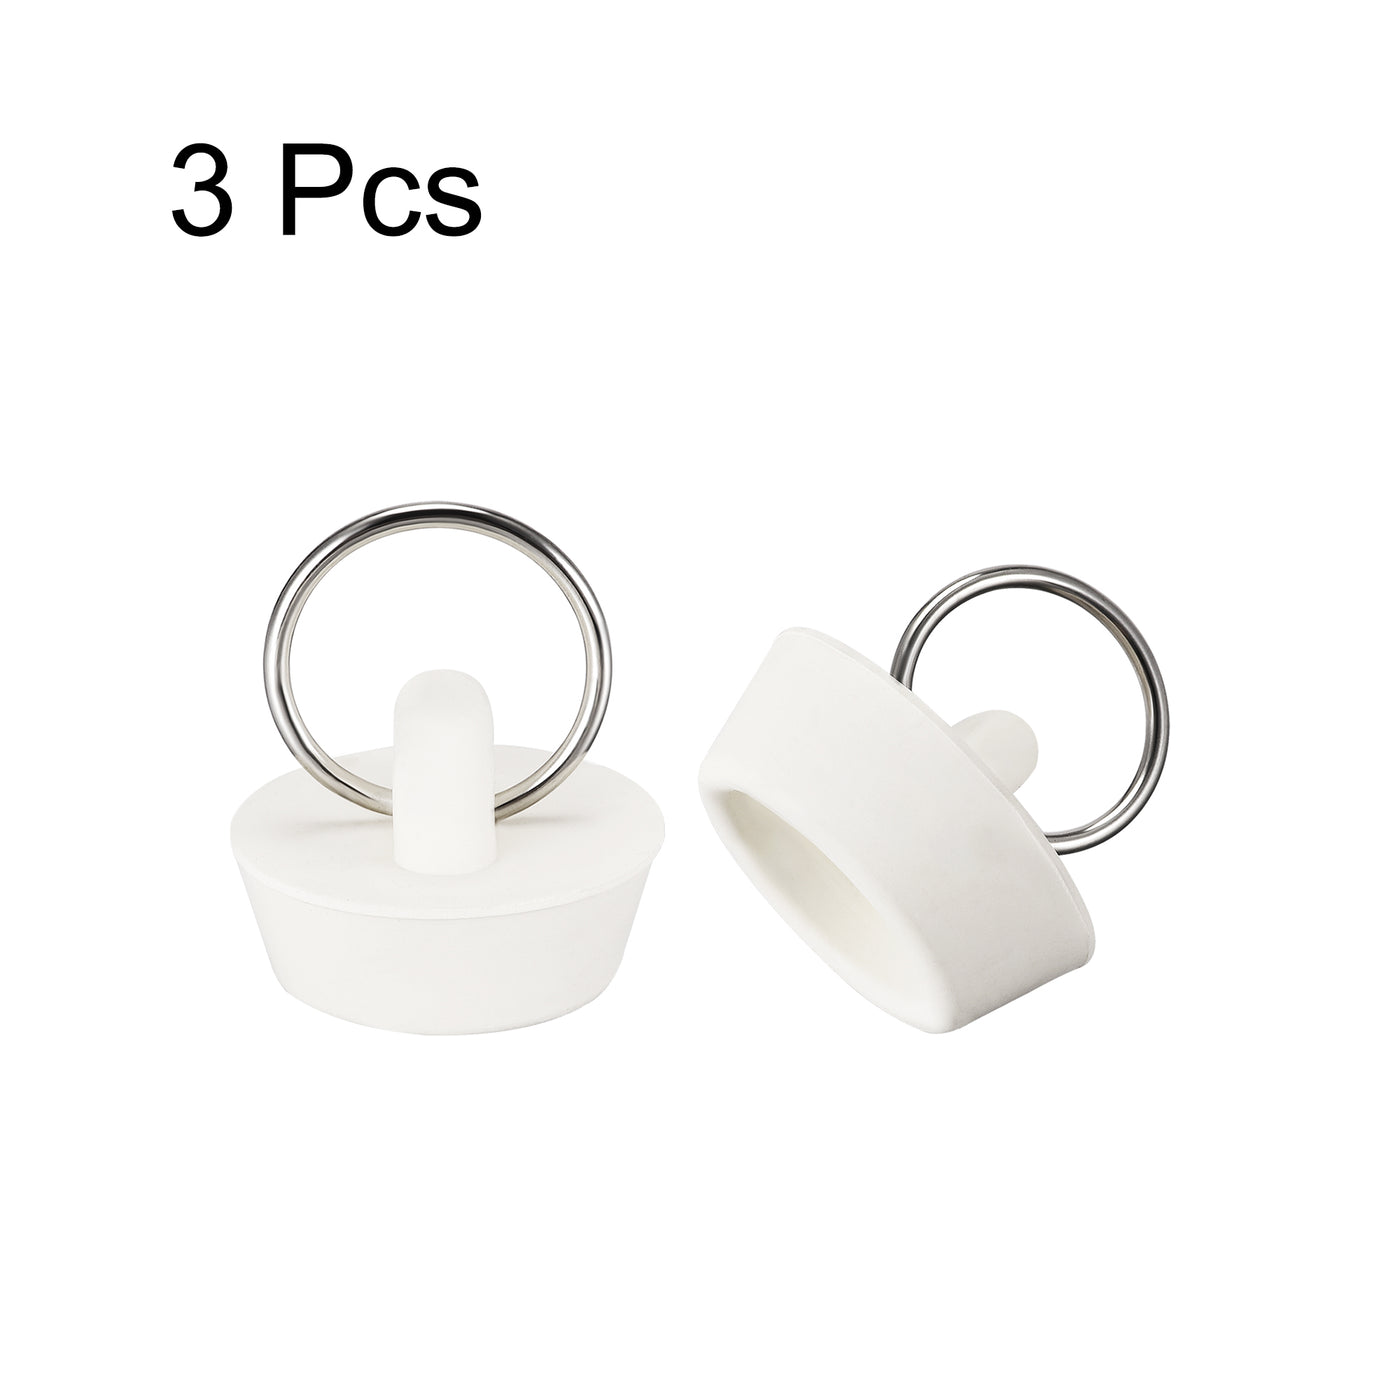 Uxcell Uxcell Rubber Sink Plug, White Drain Stopper Fit 2-3/32" to 2-3/16" Drain with Hanging Ring for Bathtub Kitchen and Bathroom 3pcs